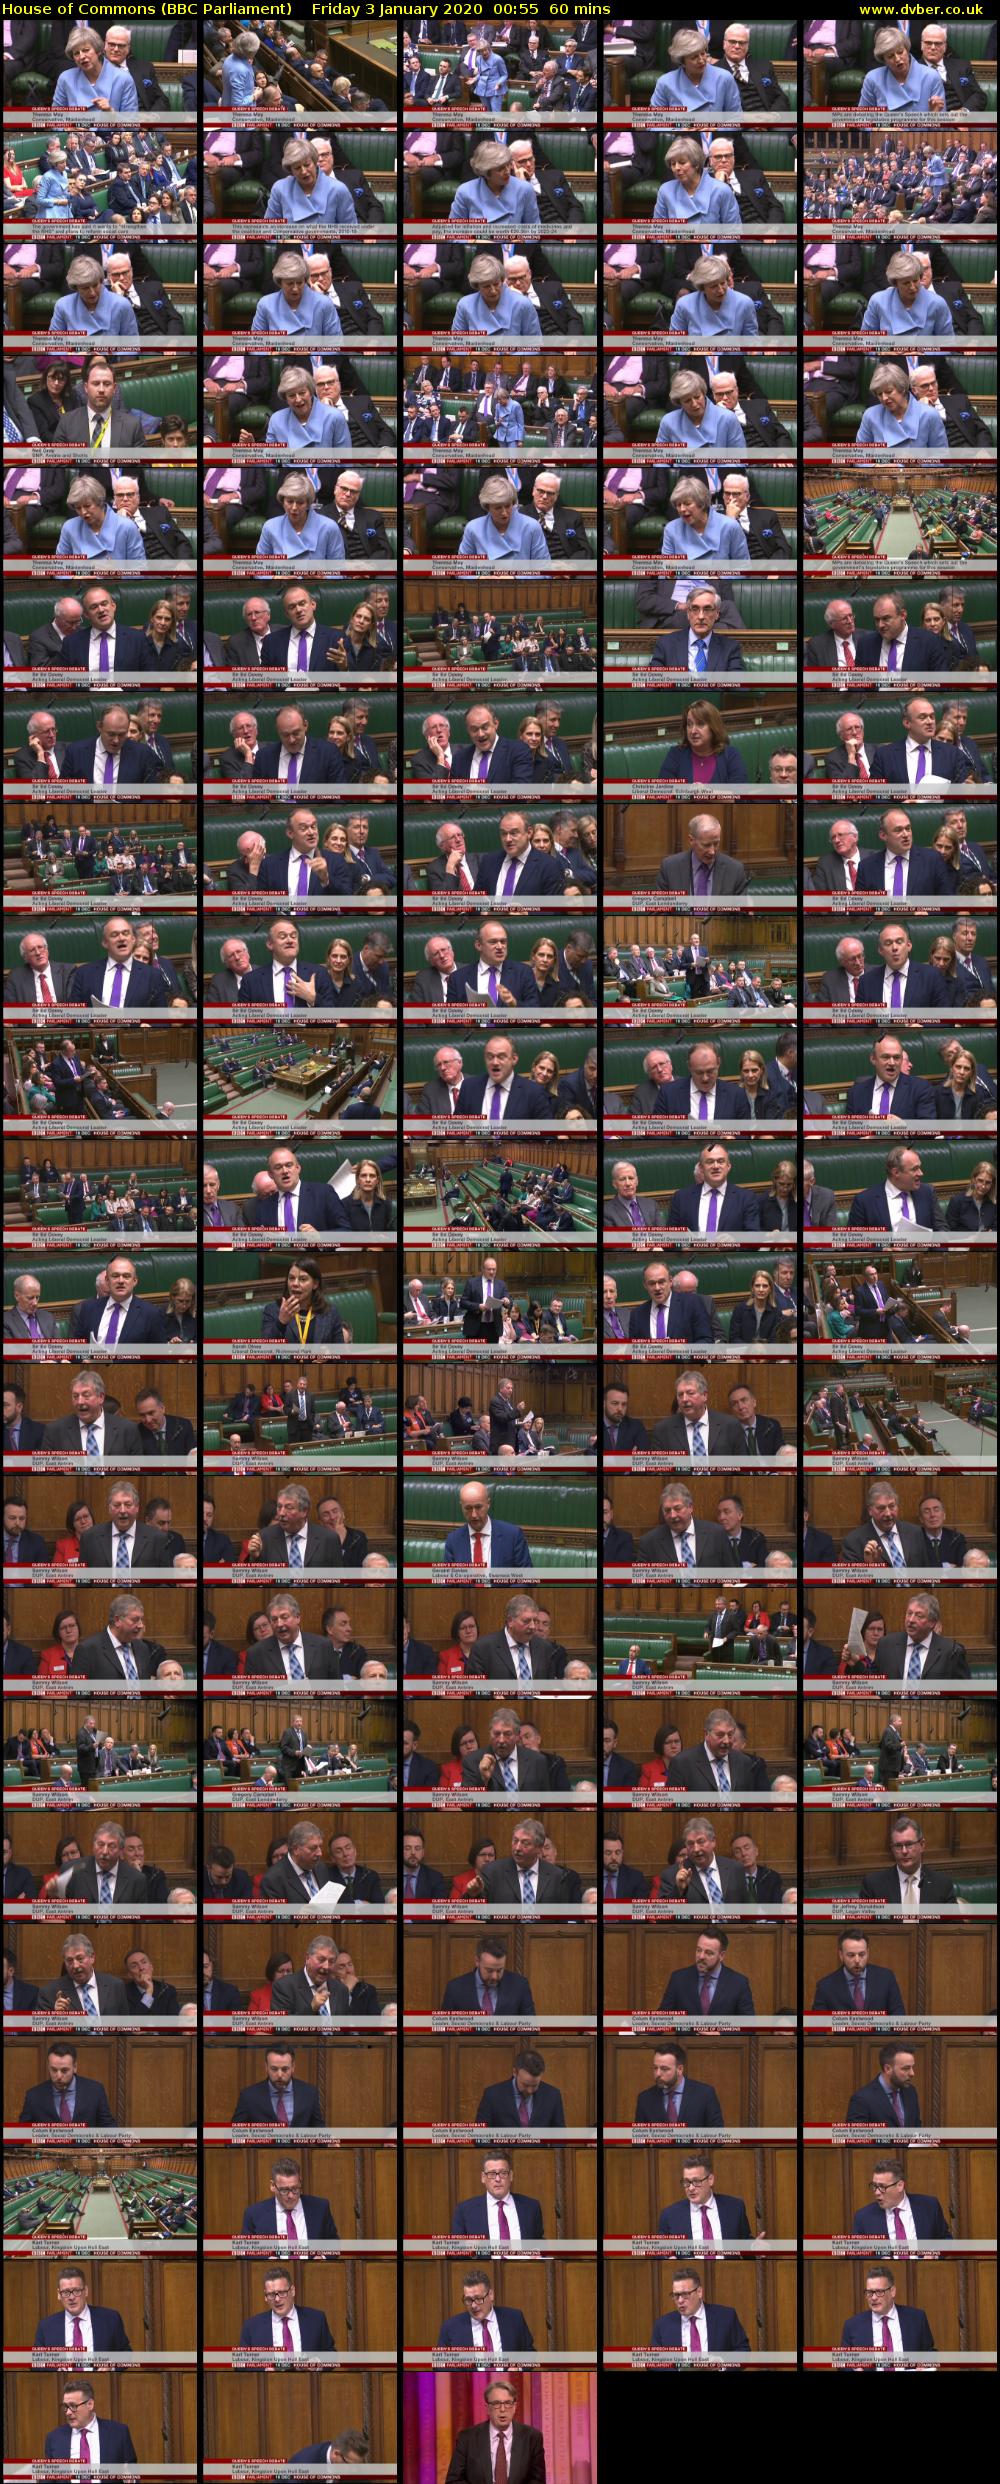 House of Commons (BBC Parliament) Friday 3 January 2020 00:55 - 01:55